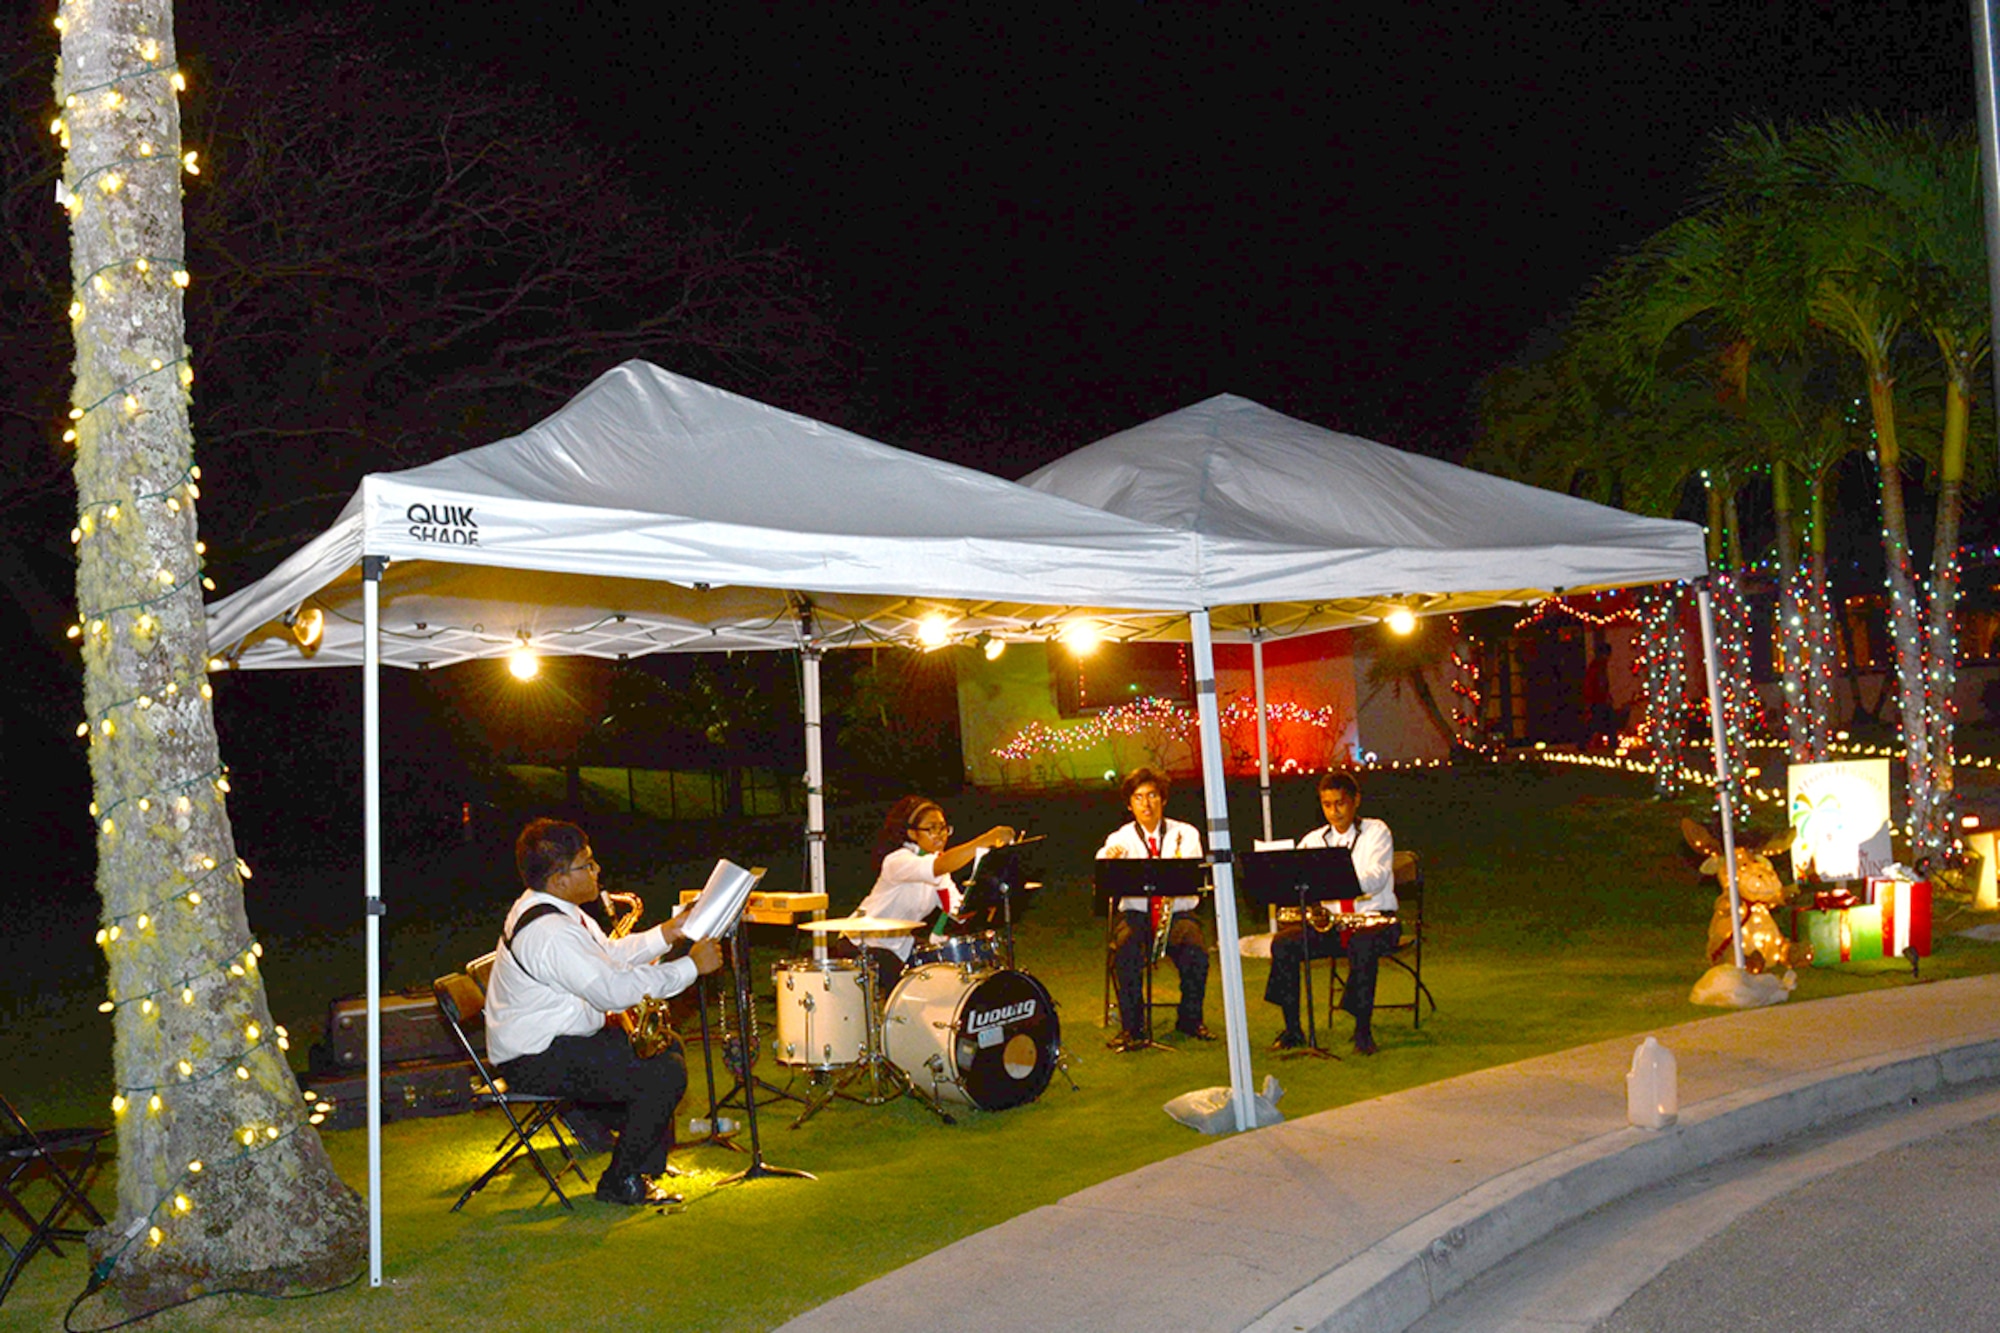 Members of the Guam National Guard Band play holiday music on Rota Drive for Team Andersen members during the annual base Rota Walk Dec. 13, 2014, at Andersen Air Force Base, Guam. Hundreds military members and civilians attended the event which is held every December to showcase holiday decorations in the base housing area on Rota Drive.(U.S. Air Force photo by Tech. Sgt. Zachary Wilson/Released)